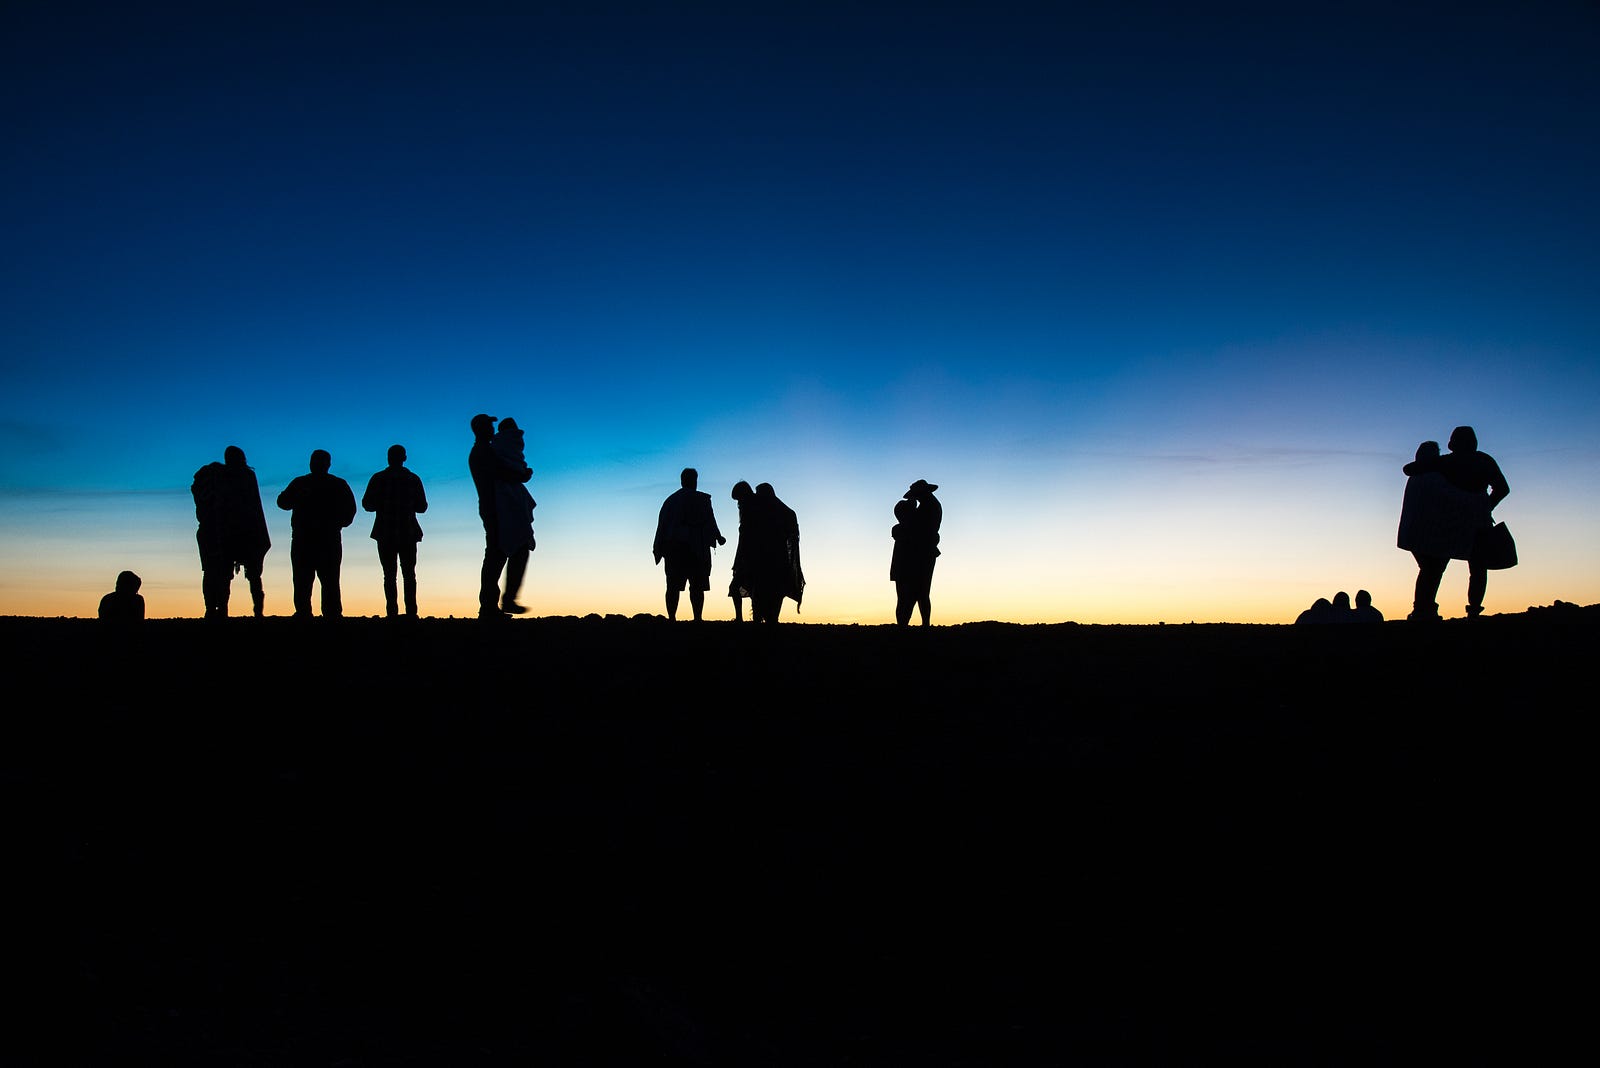 Several individuals in sihouette as the sun’s last rays rise in the background. Morning movement is a key ritual observed in the Blue Zones, world regions known for their extraordinary longevity and vitality. Light physical activity at the start of the day sets a positive tone for your body and mind.